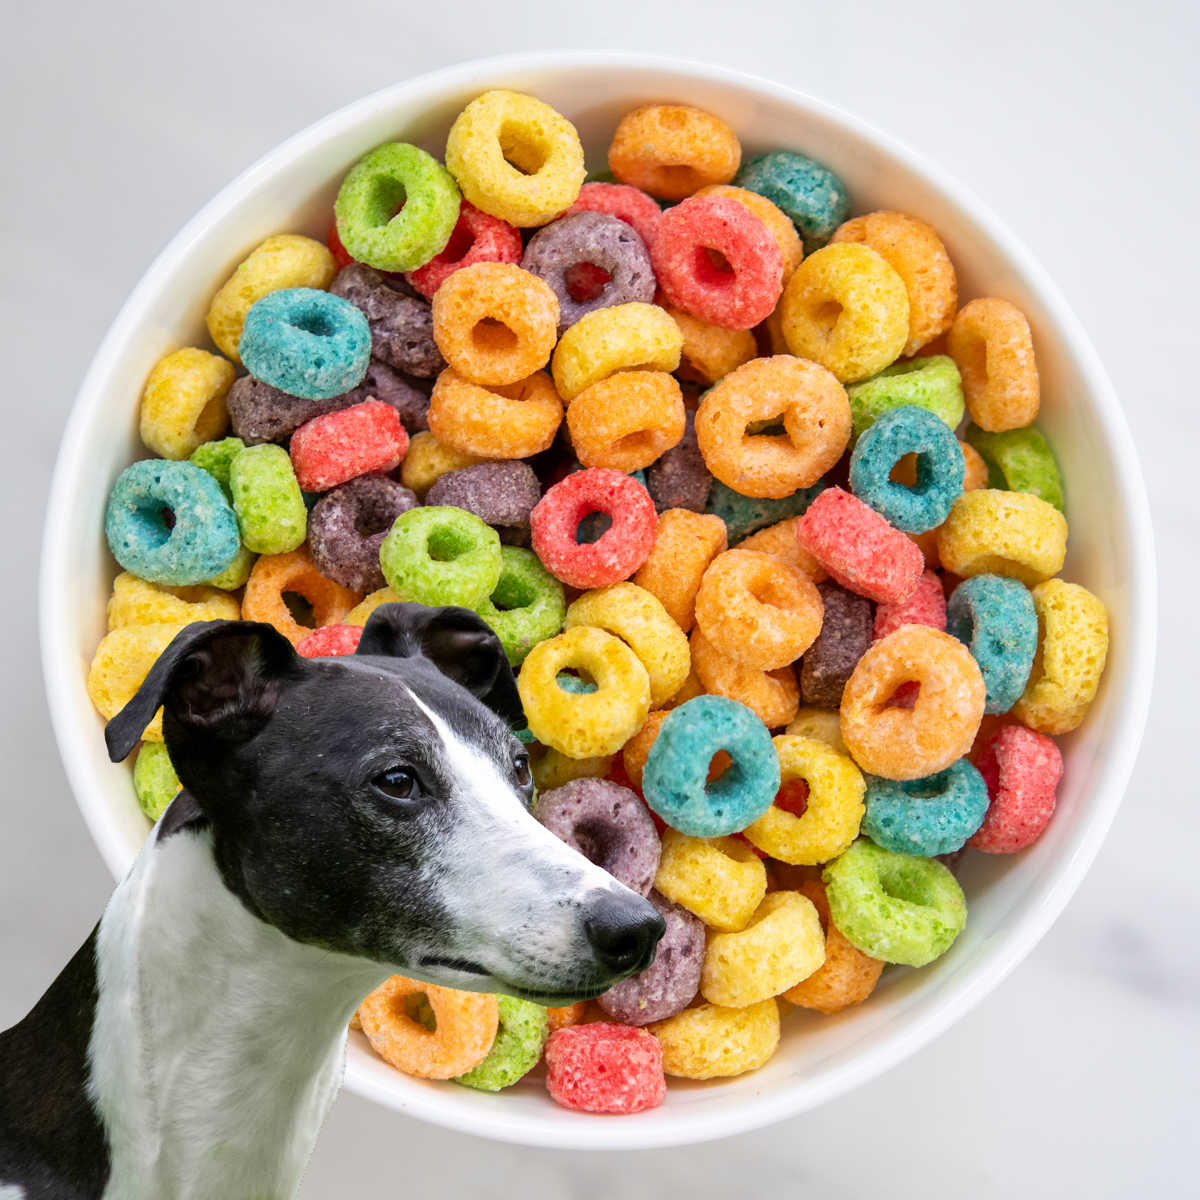 Dog in front of a bowl of Froot Loops cereal.